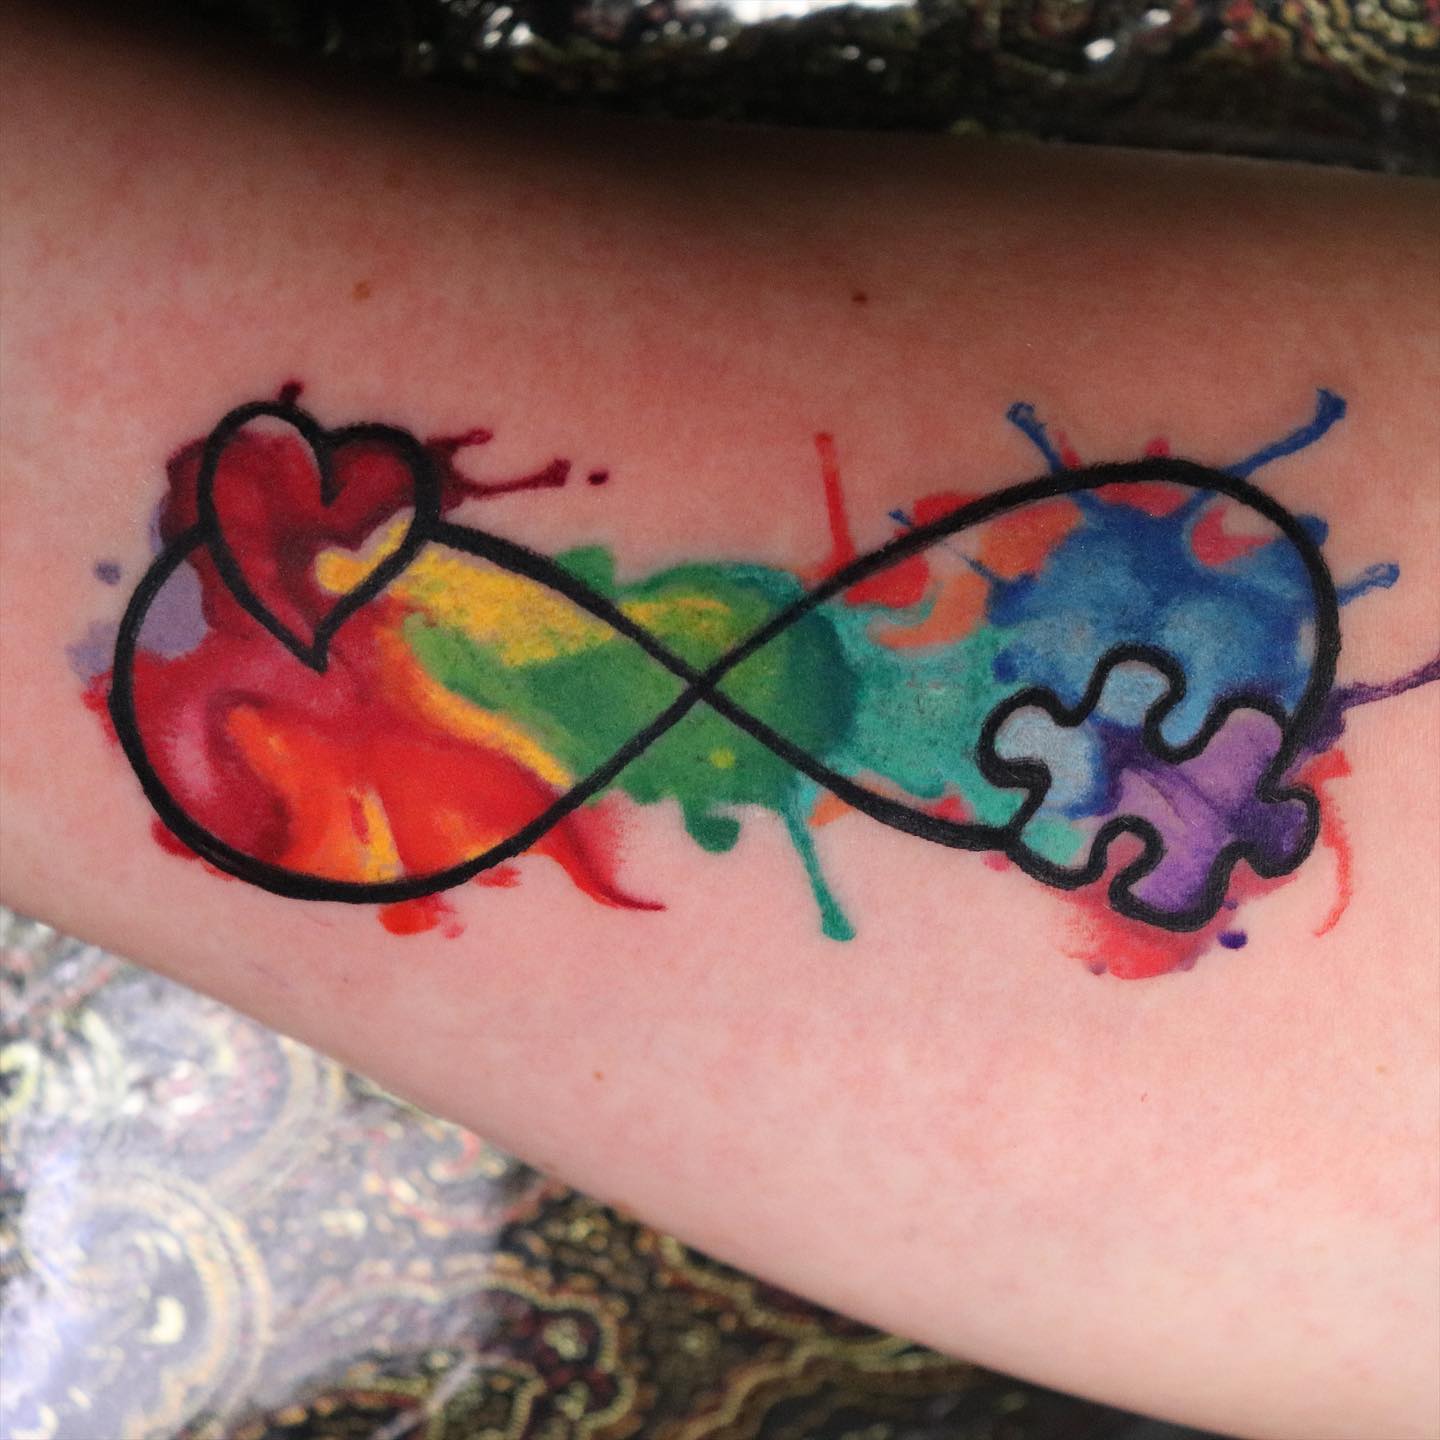 Whether your loved one may have autism or not, why not show them that you plan on loving them forever and endlessly with this infinity tattoo?